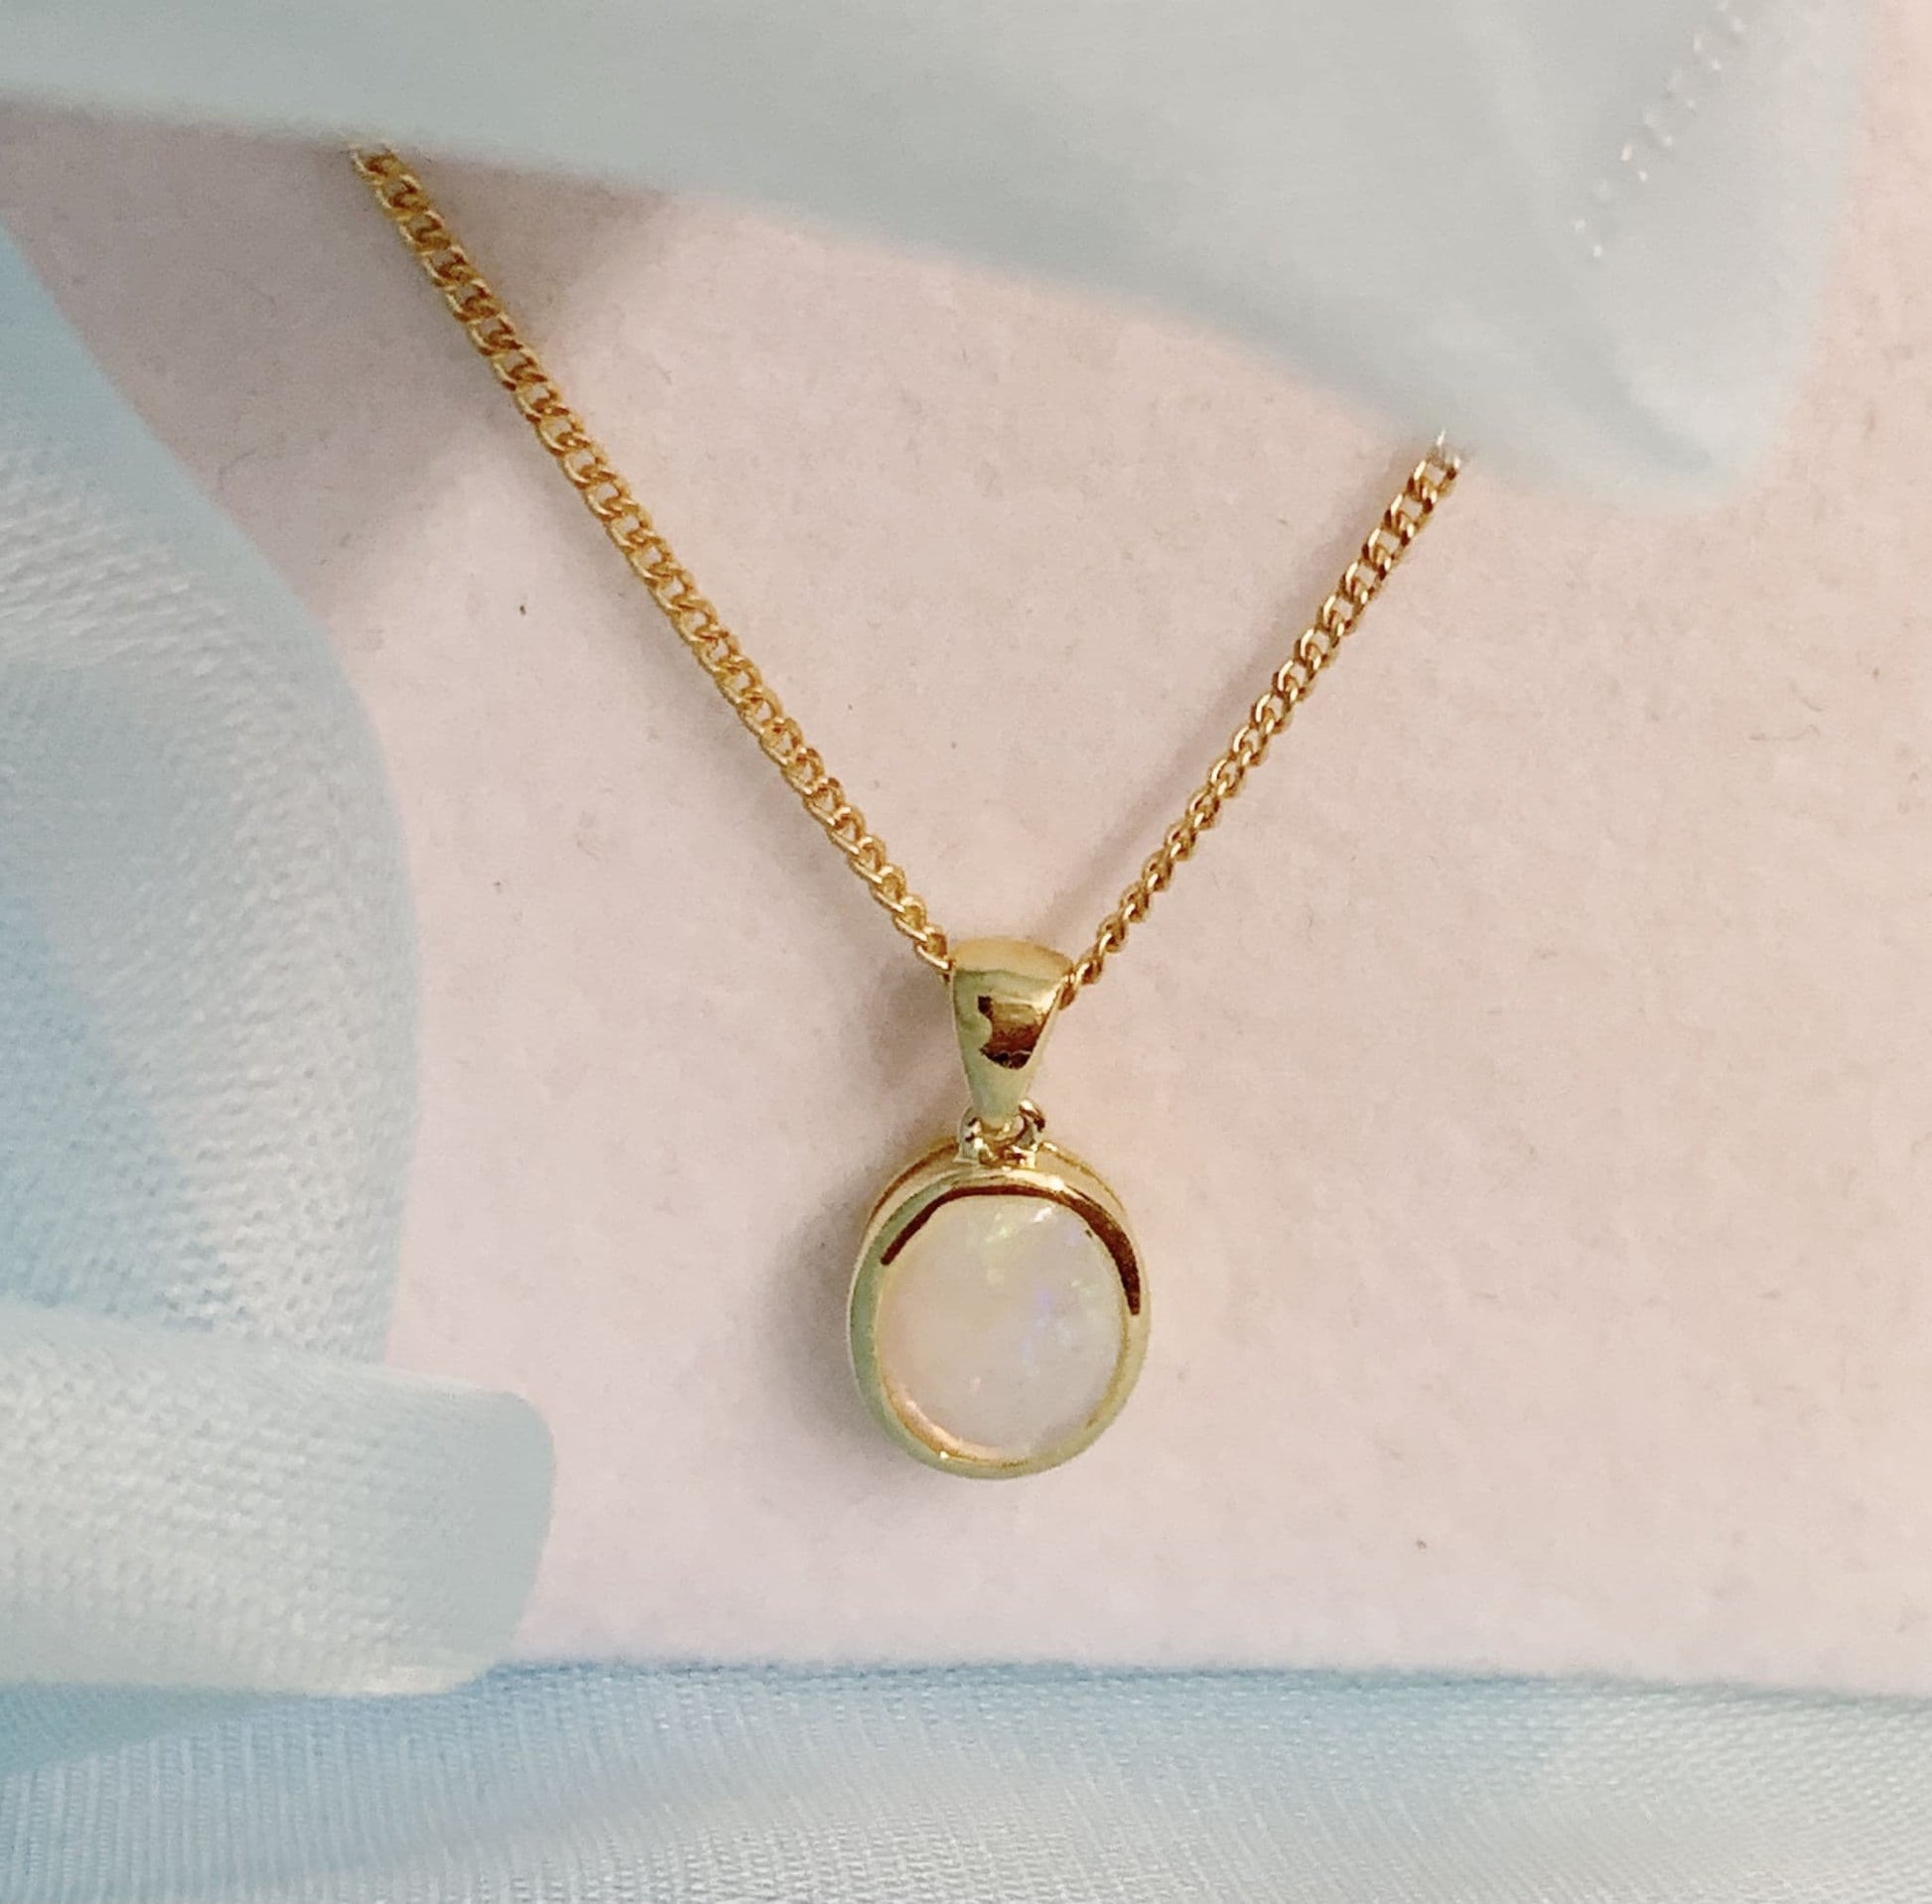 Real opal necklace yellow gold oval pendant smooth rubbed over setting